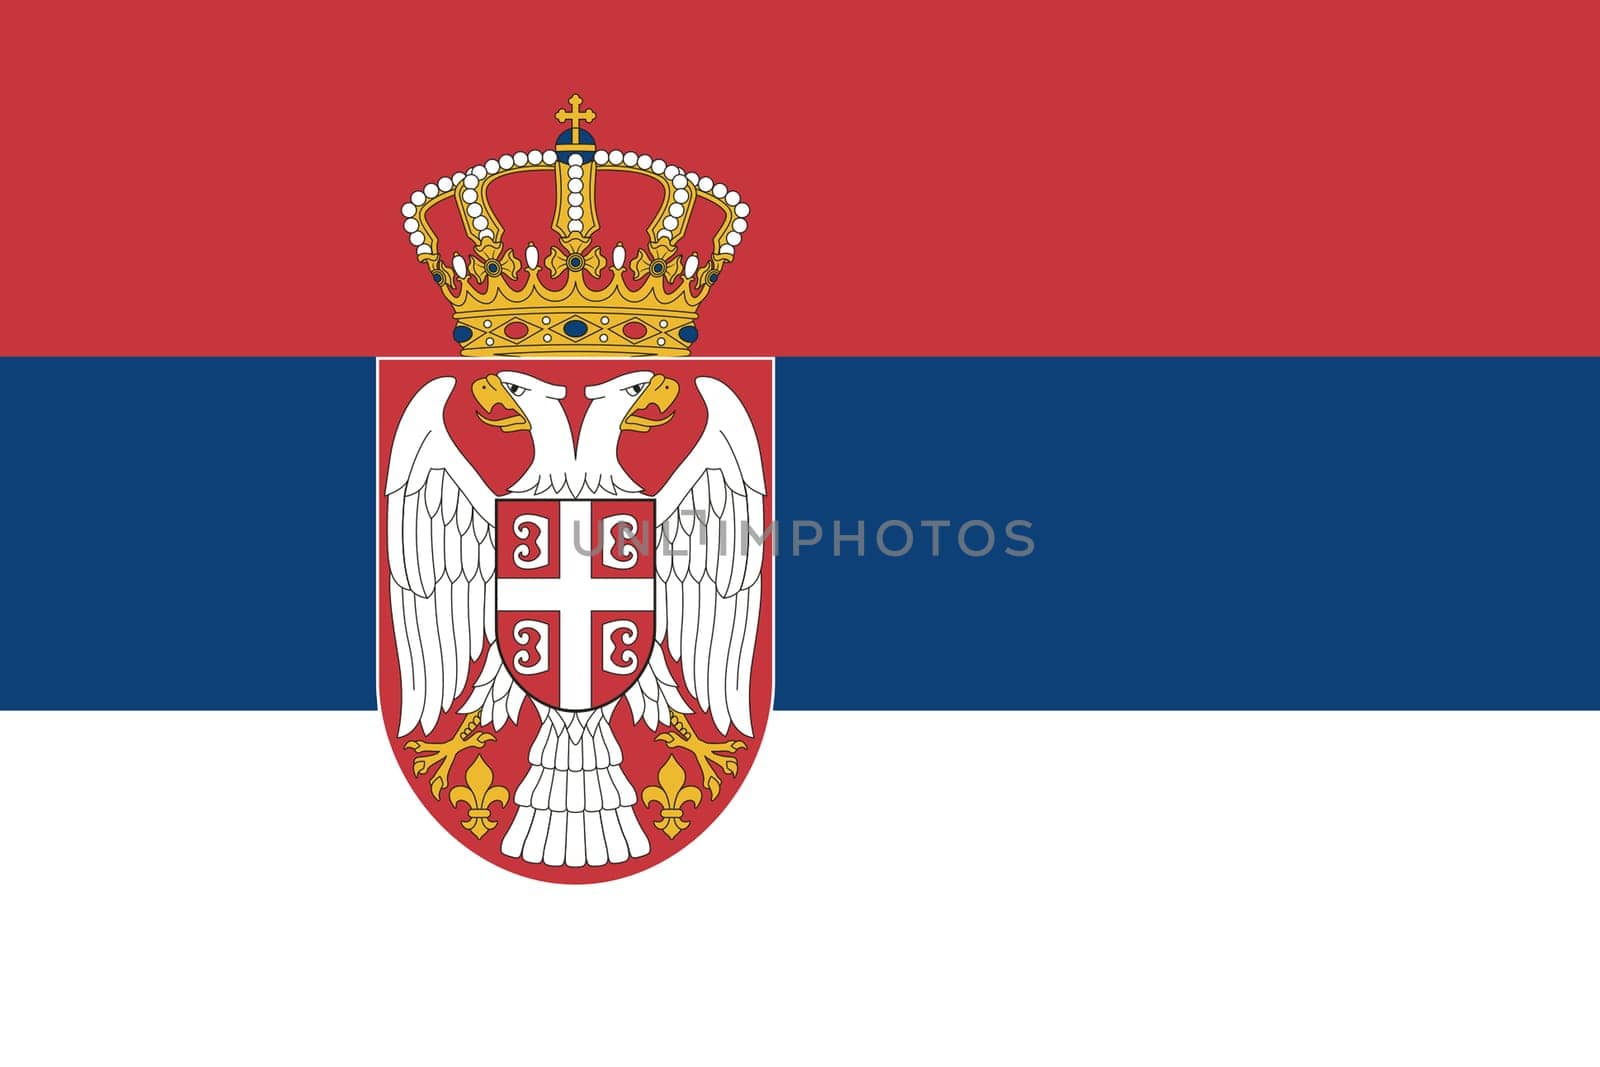 A Serbia flag background illustration red blue white